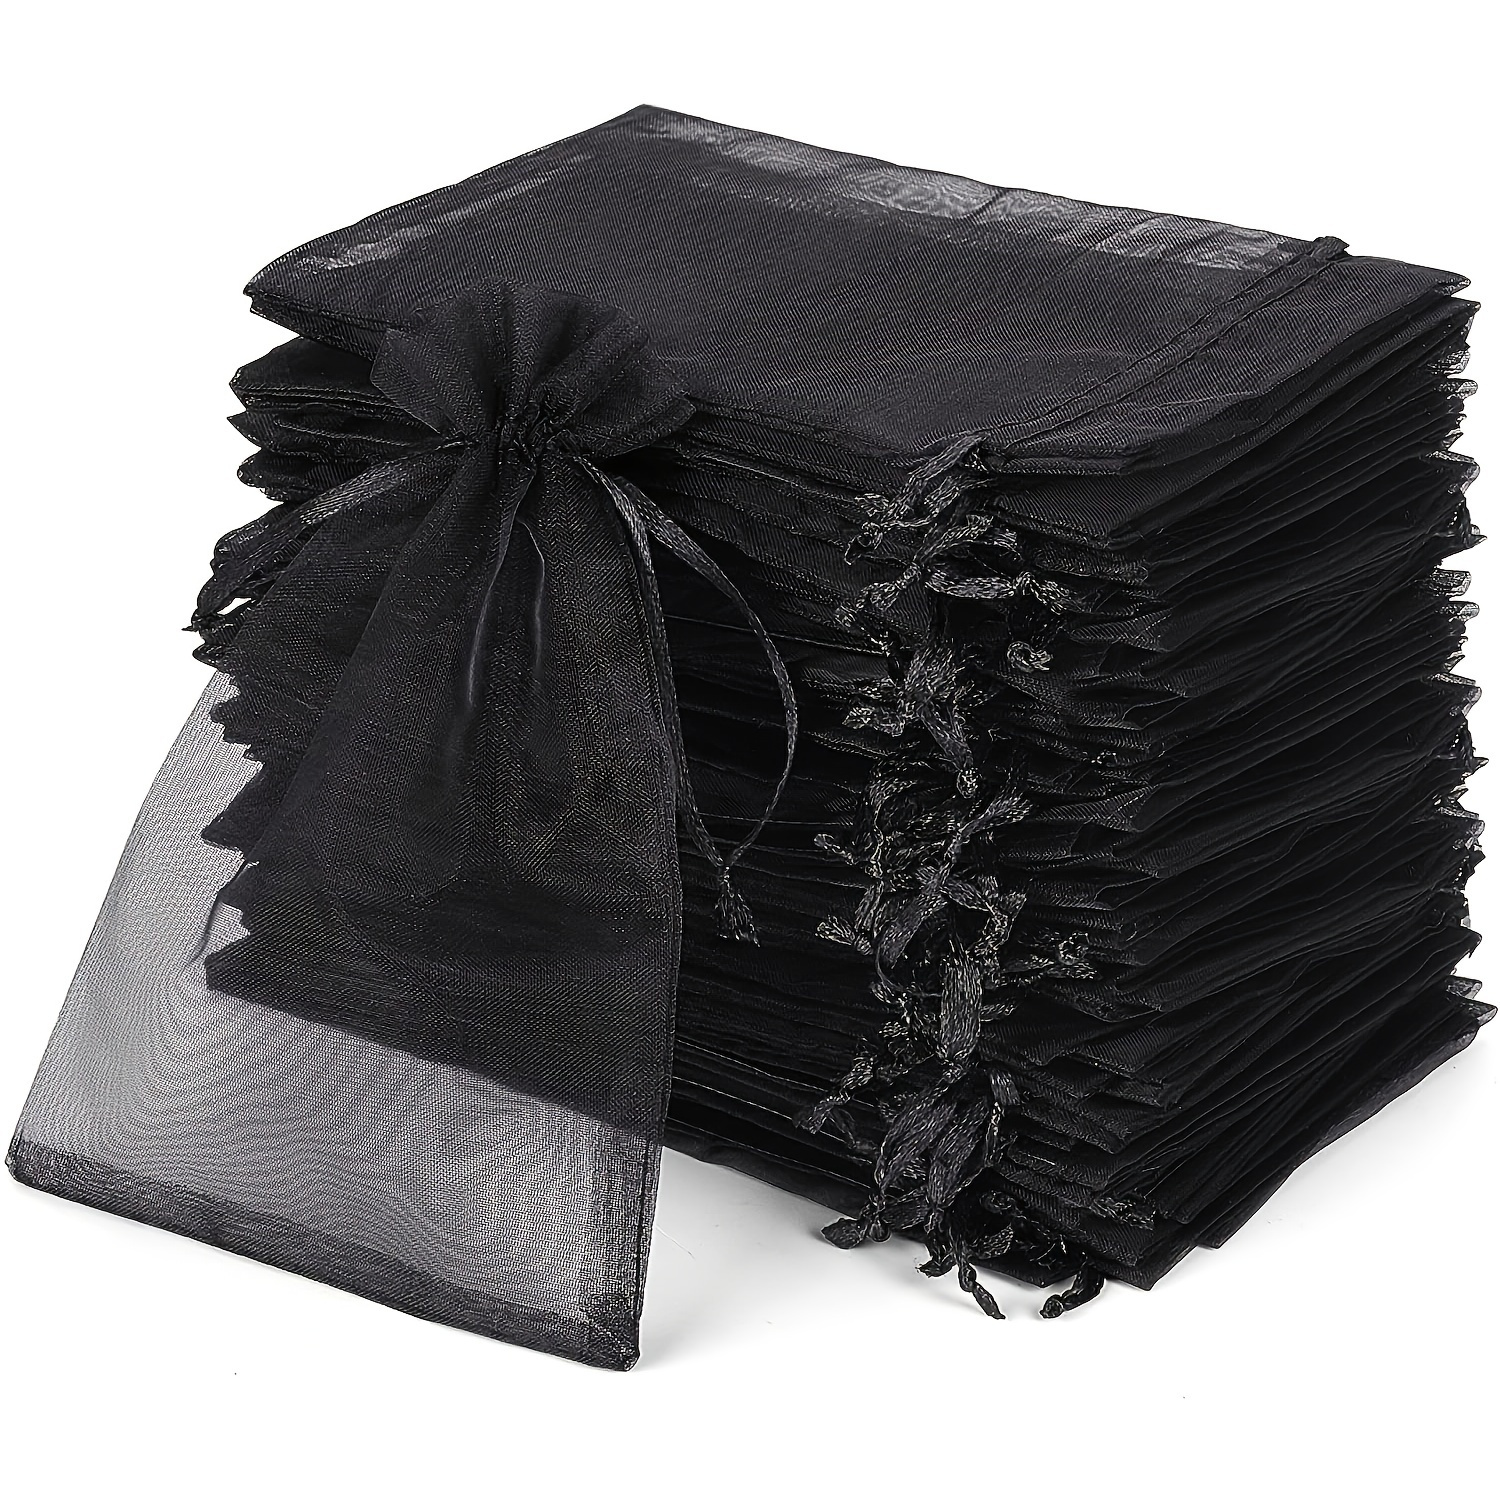 

30pcs 4x6 Inches Organza Bags With Drawstring, Jewelry Pouches, Wedding Party Christmas Favor Gift Bags (black)